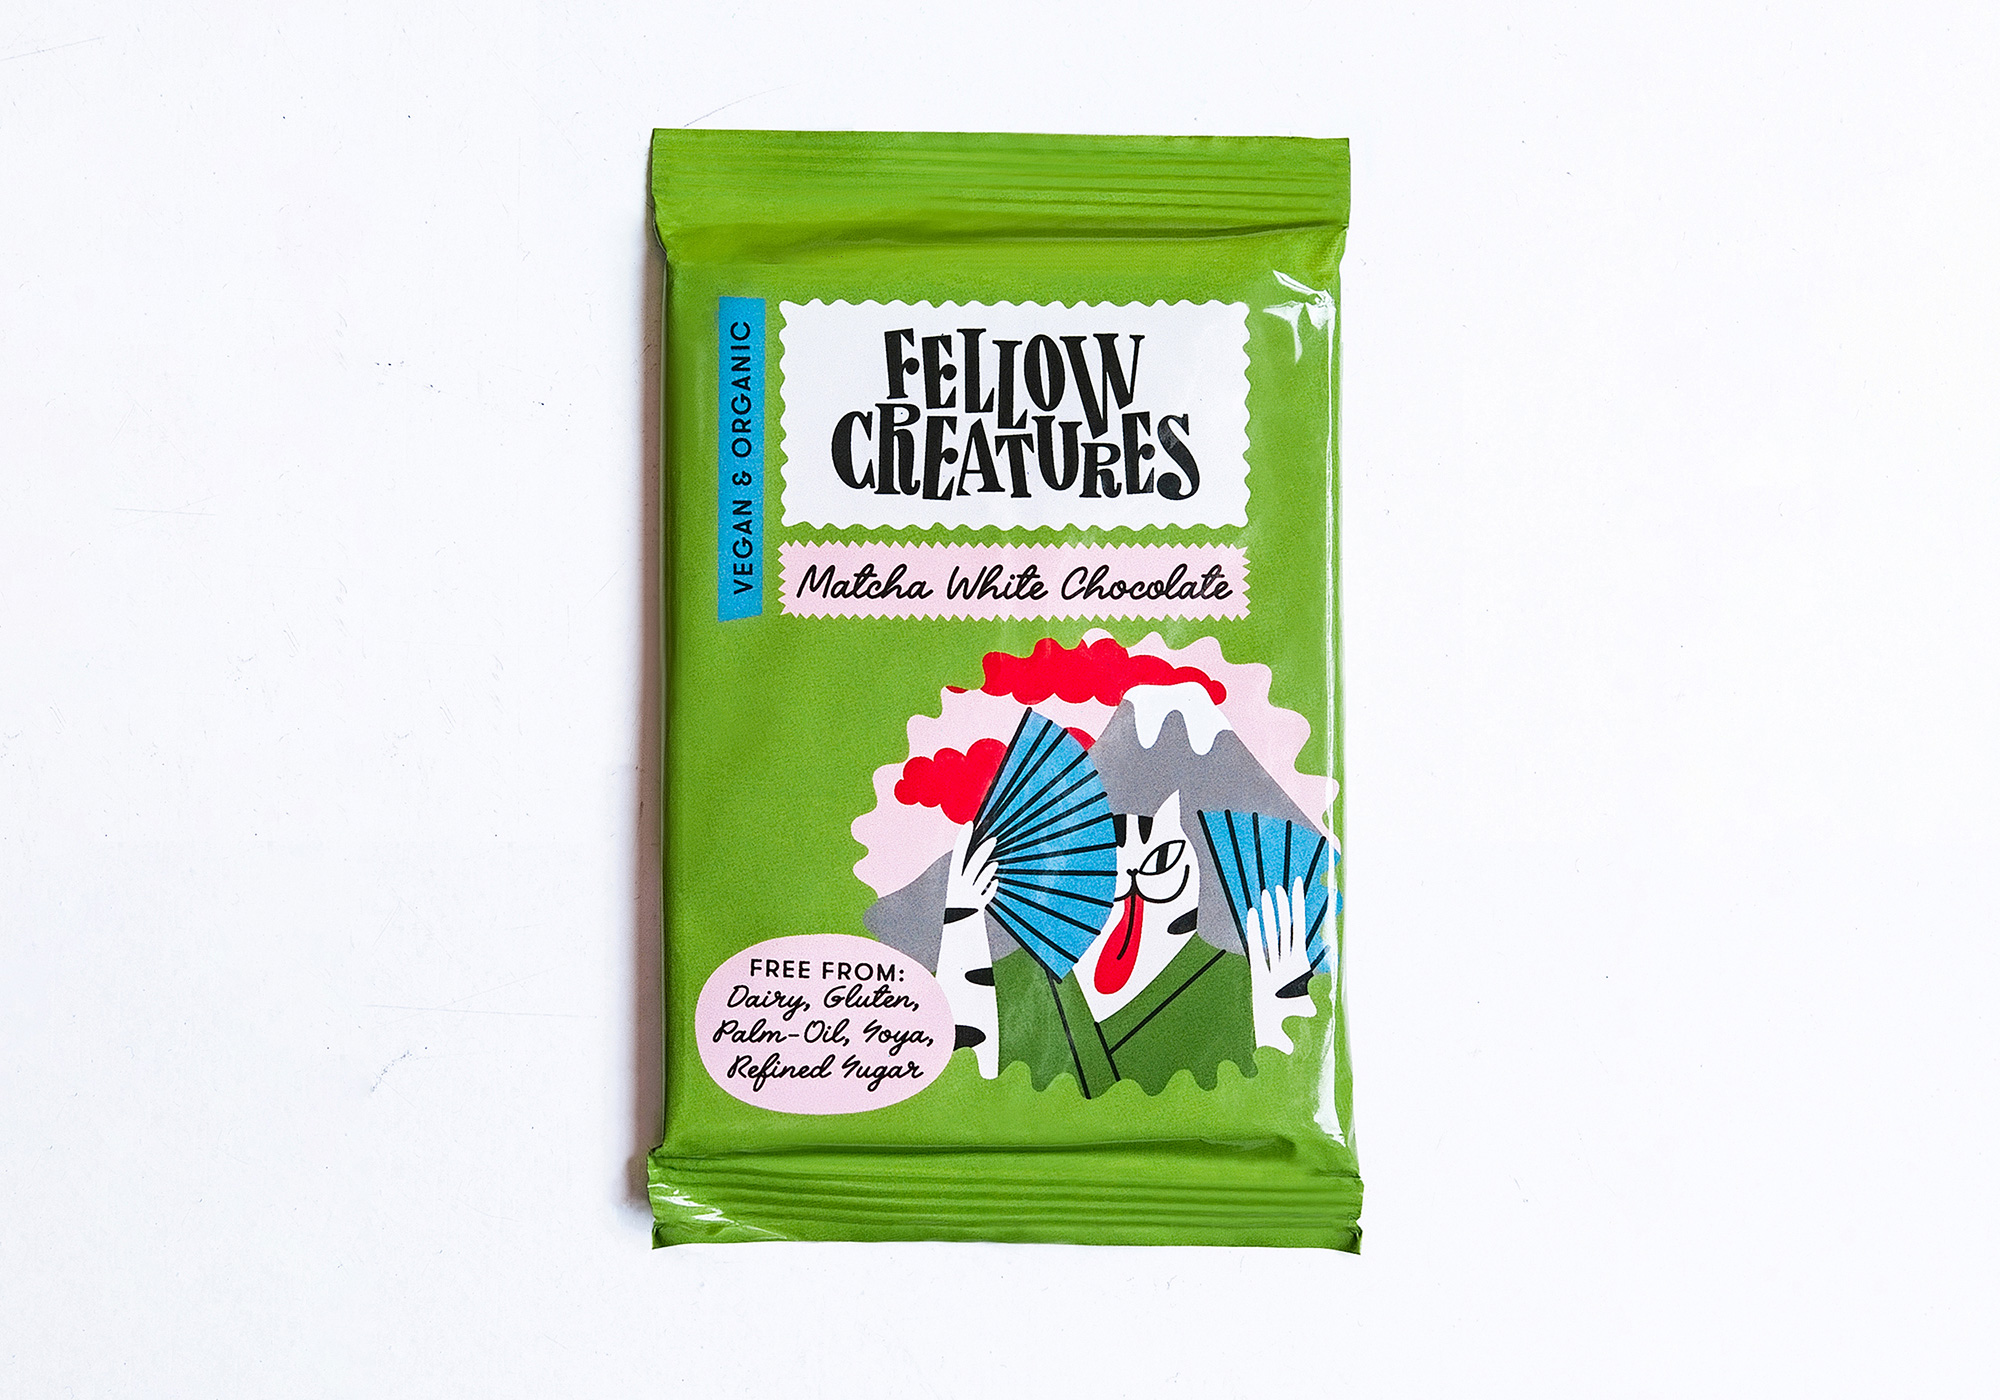 New Logo and Packaging for Fellow Creatures by Classmate Studio